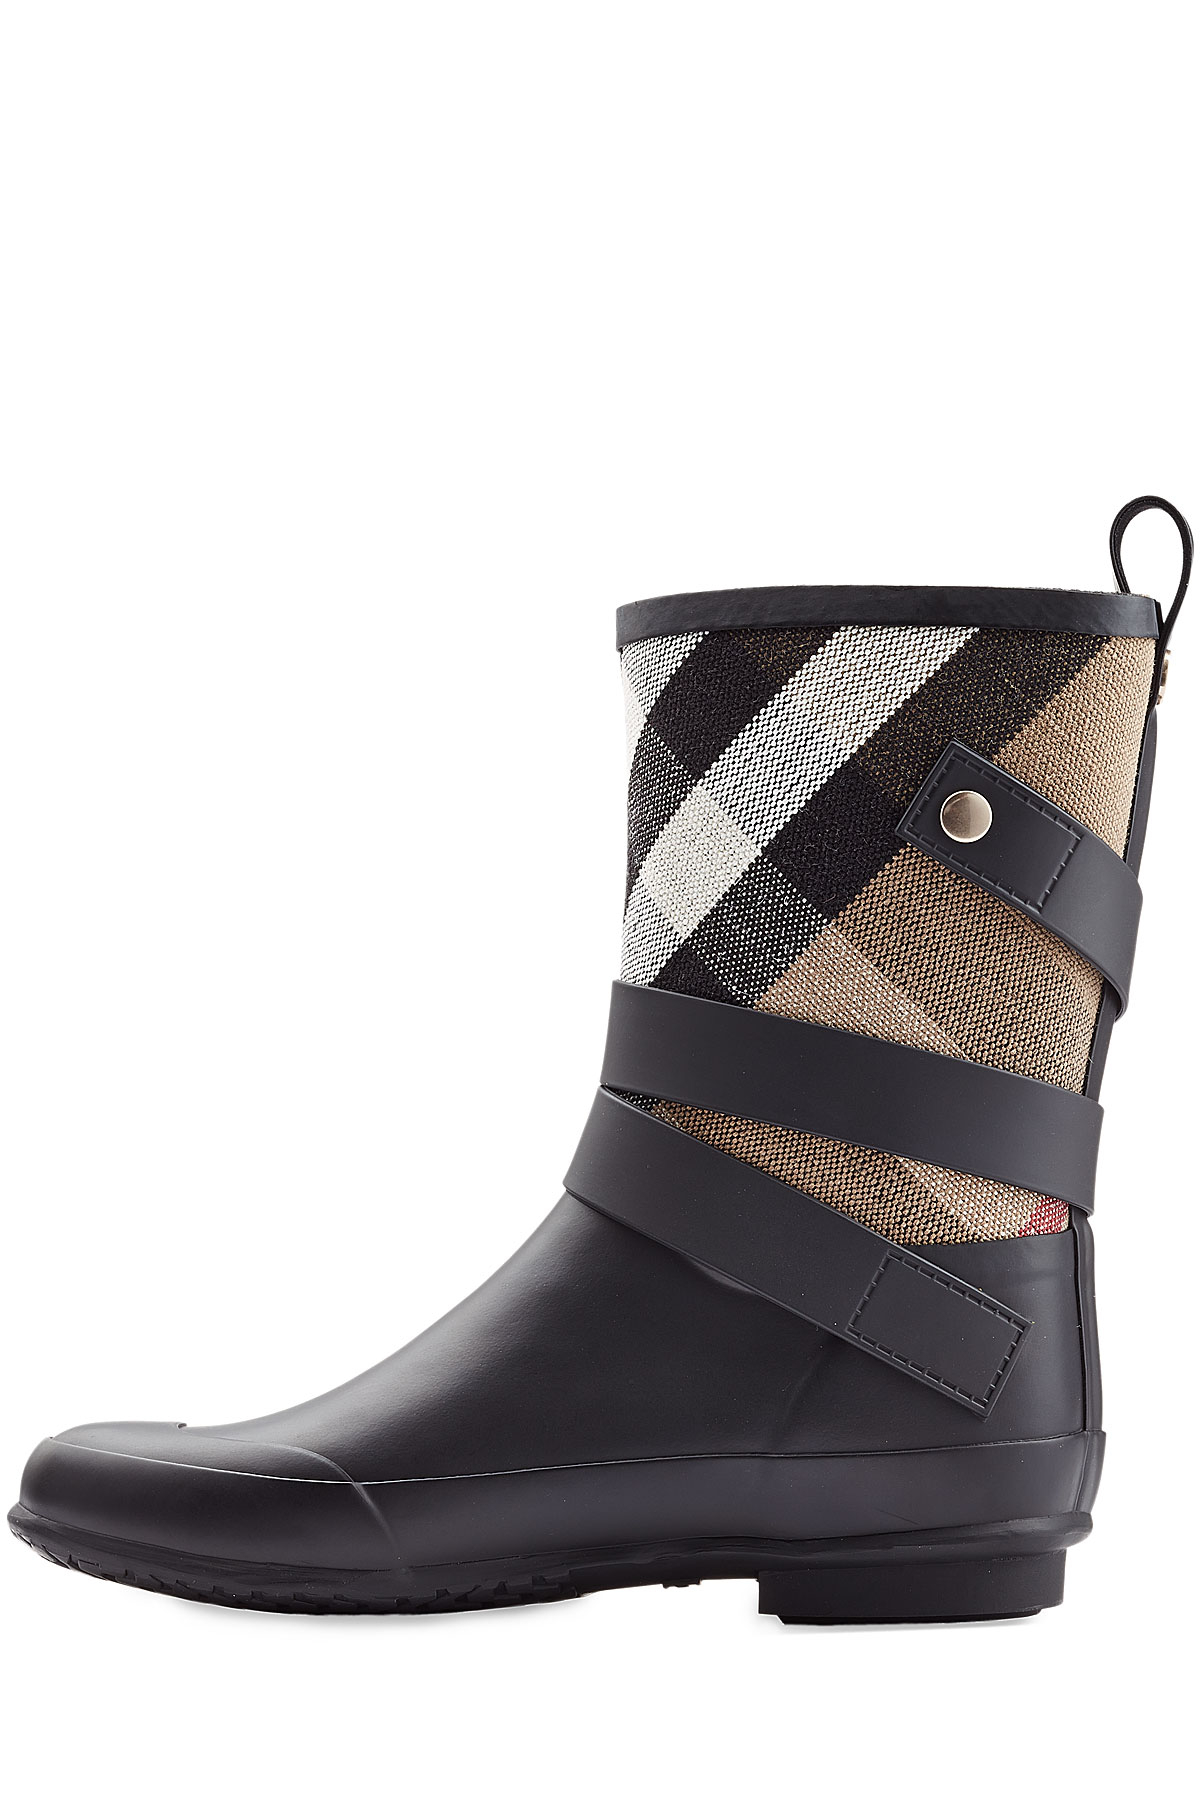 burberry holloway rain boots review